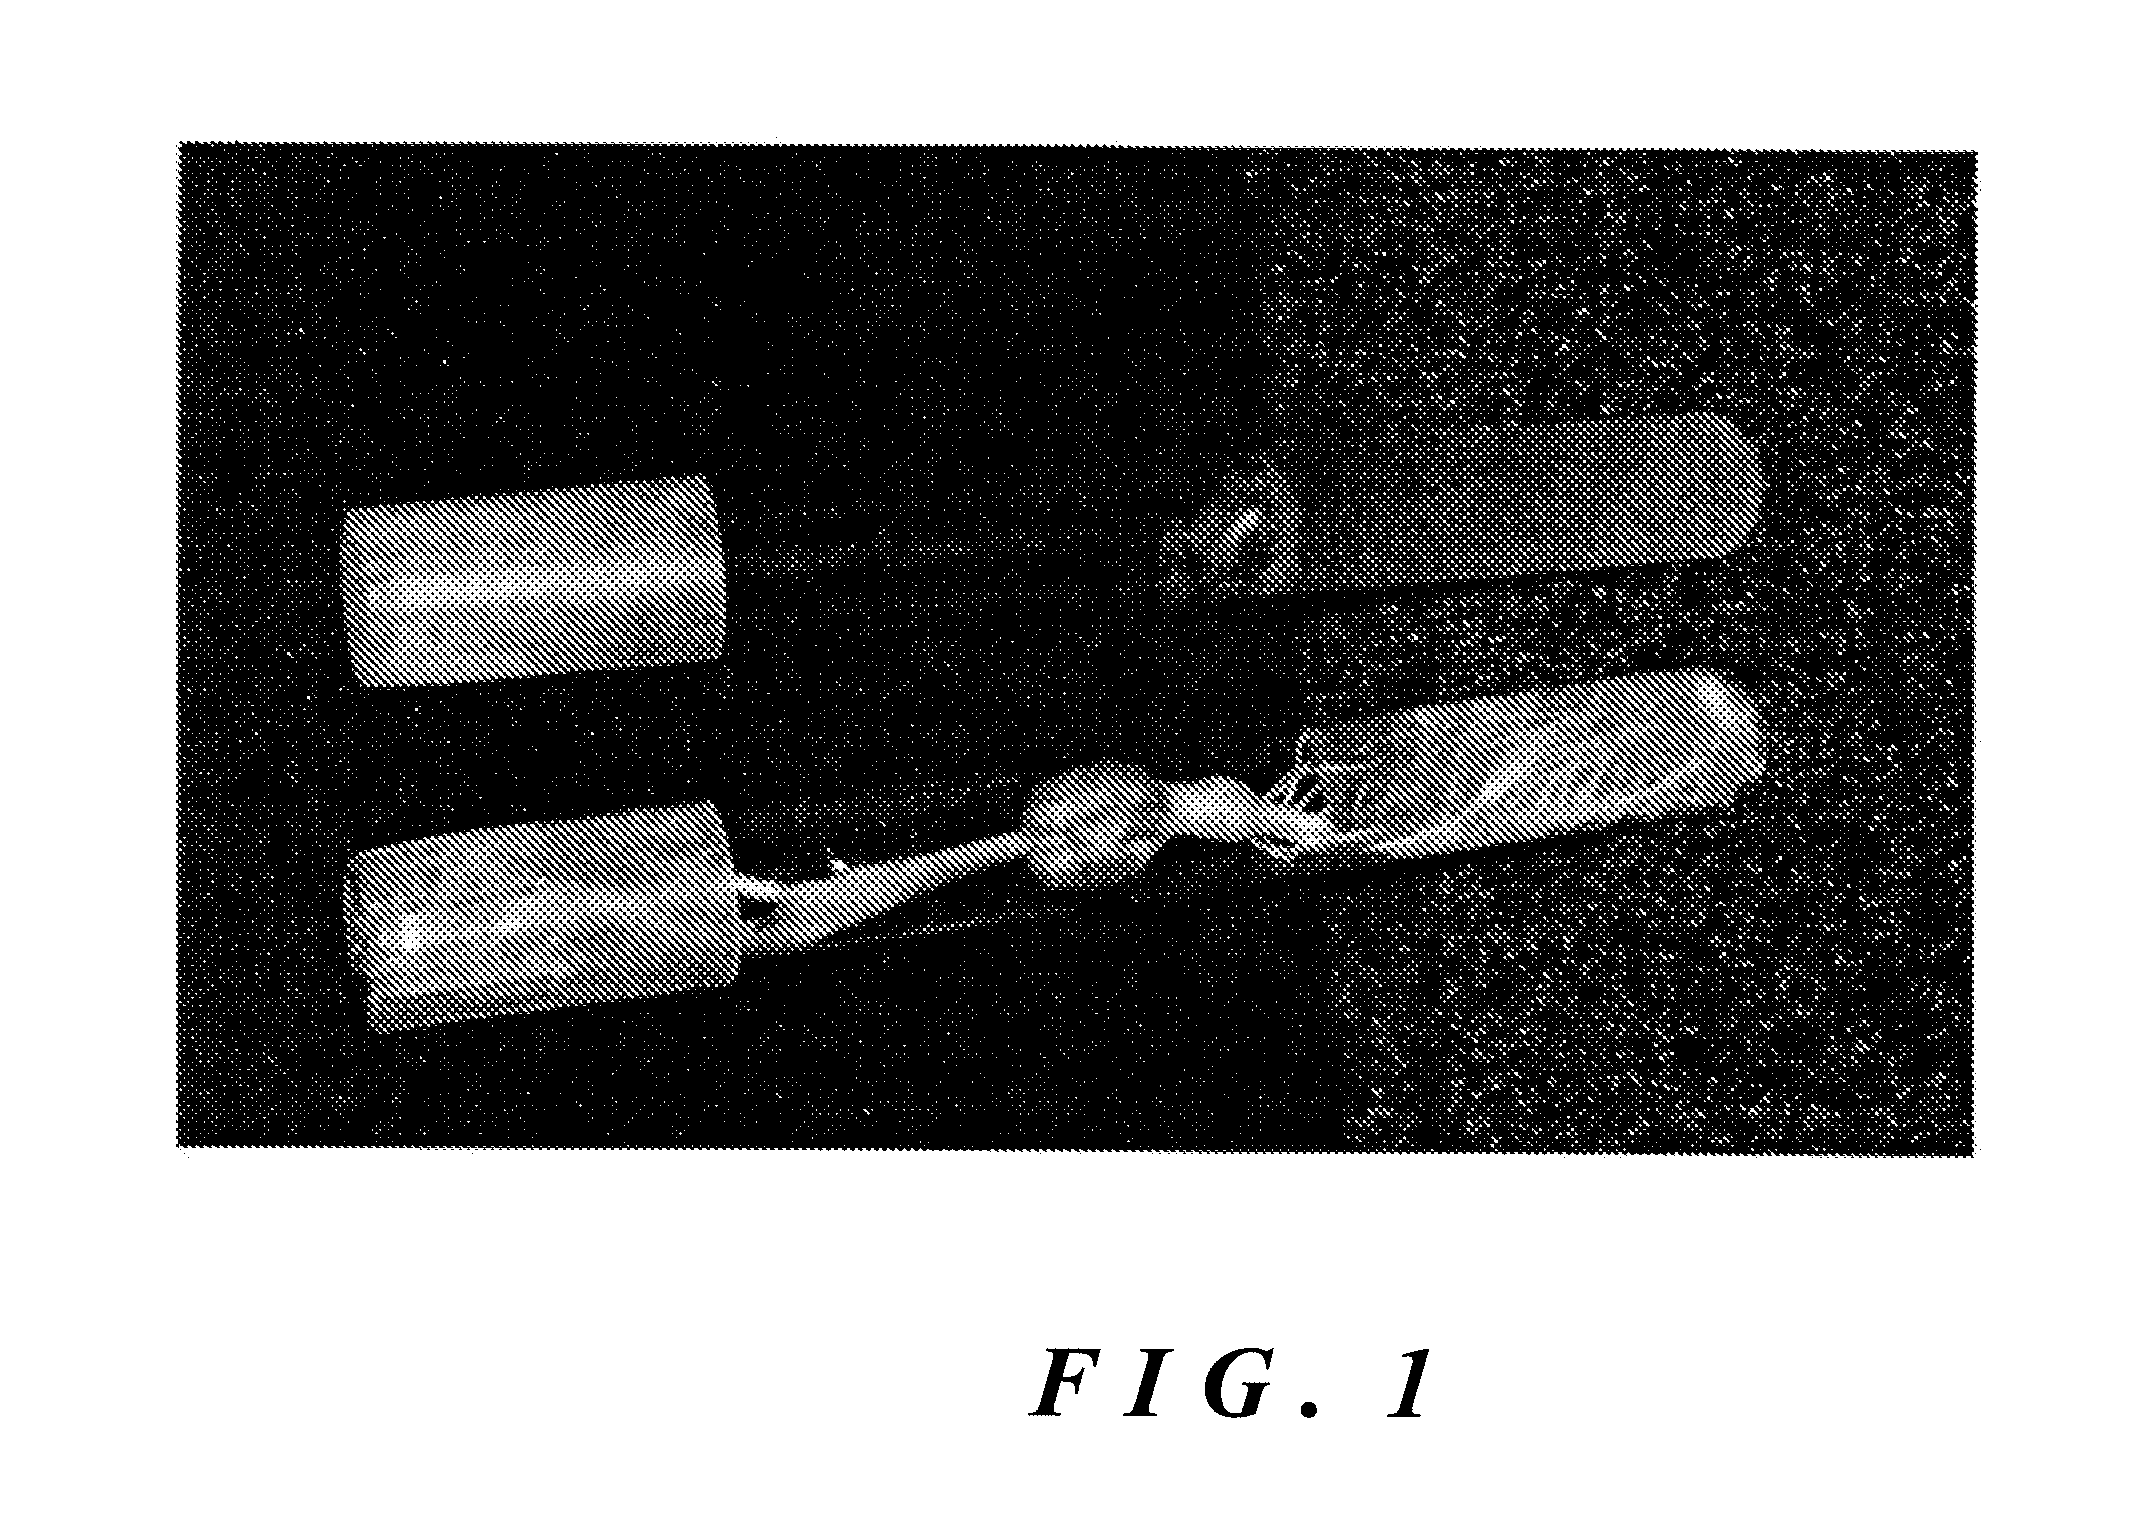 Method and composition for clearing sewer lines of roots utilizing herbicides and bacteria